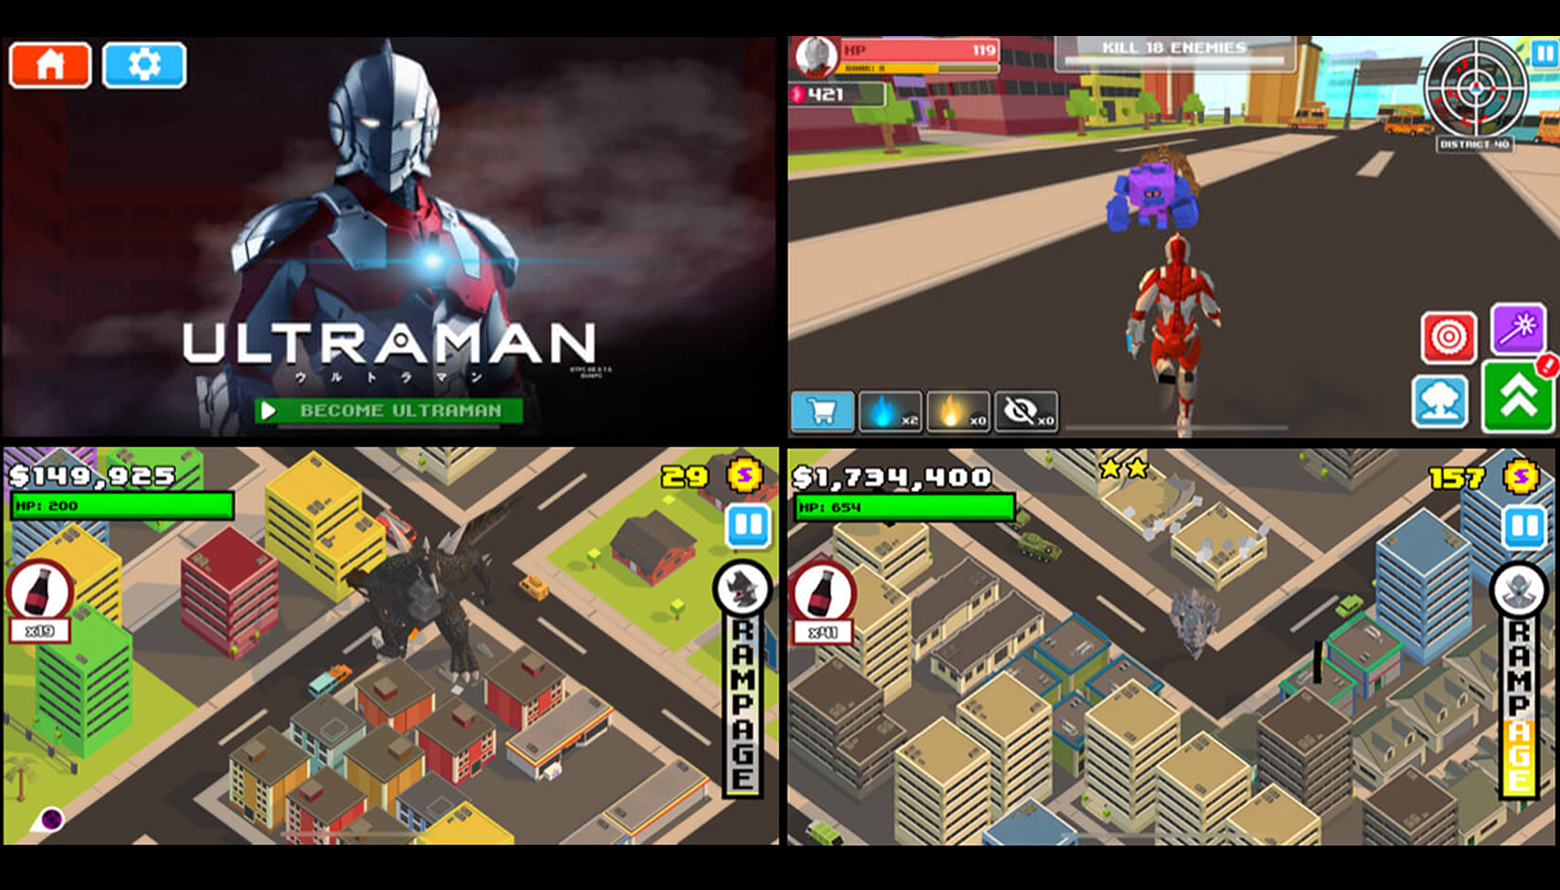 ACEVIRAL JOINS THE ULTRAMAN LICENSING PROGRAM  WITH ITS NEWEST GAME UPDATE, SMASHY CITY: ULTRAMAN!